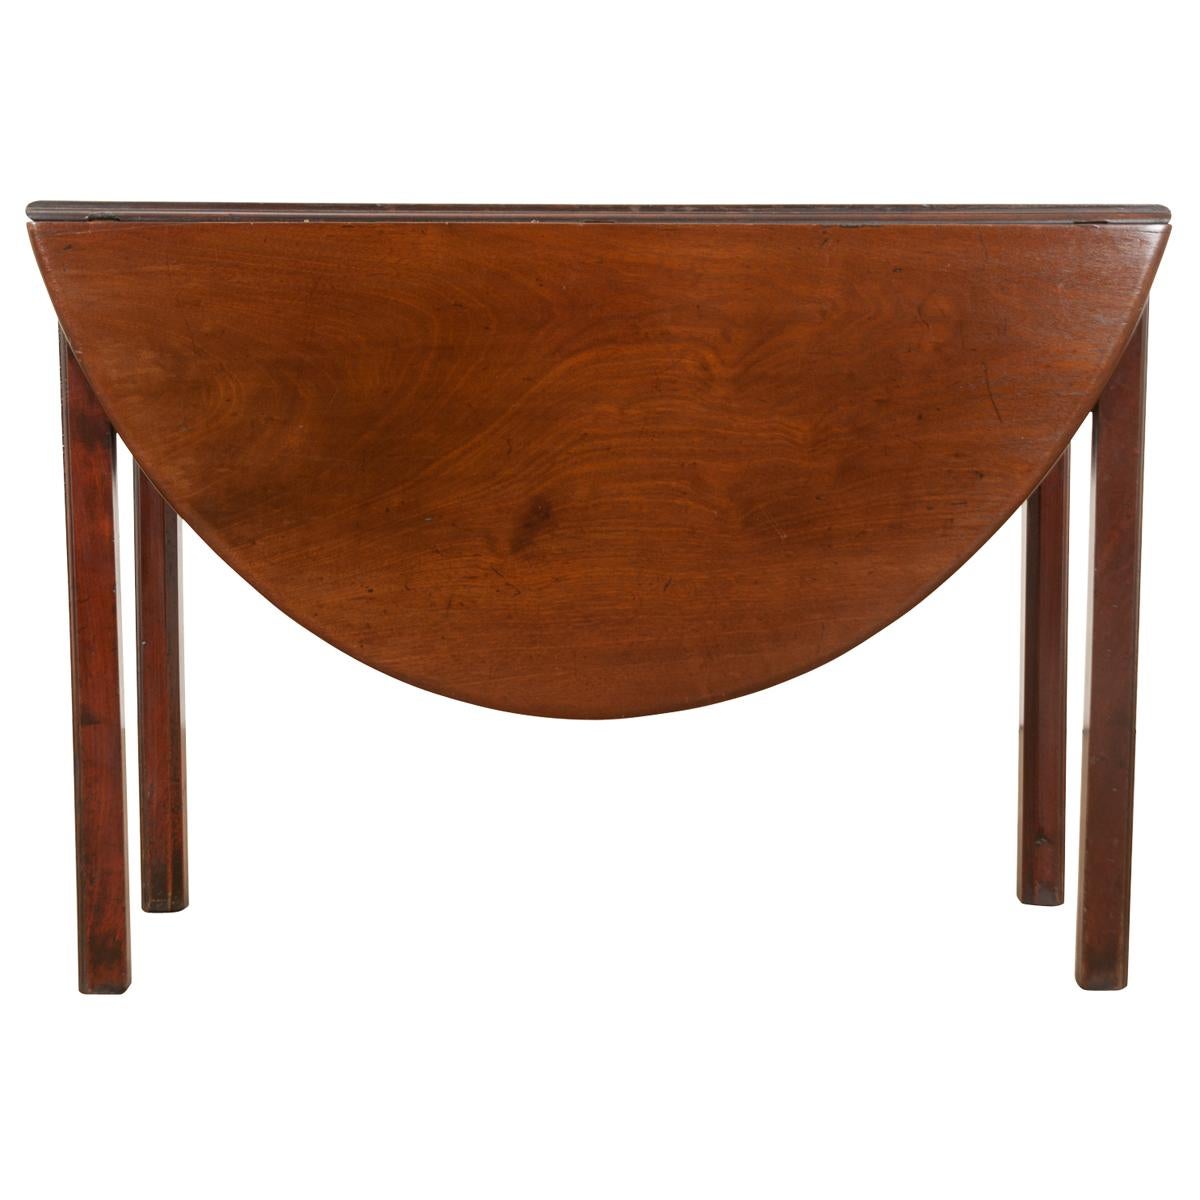 English 19th Century Mahogany Drop Leaf Table For Sale